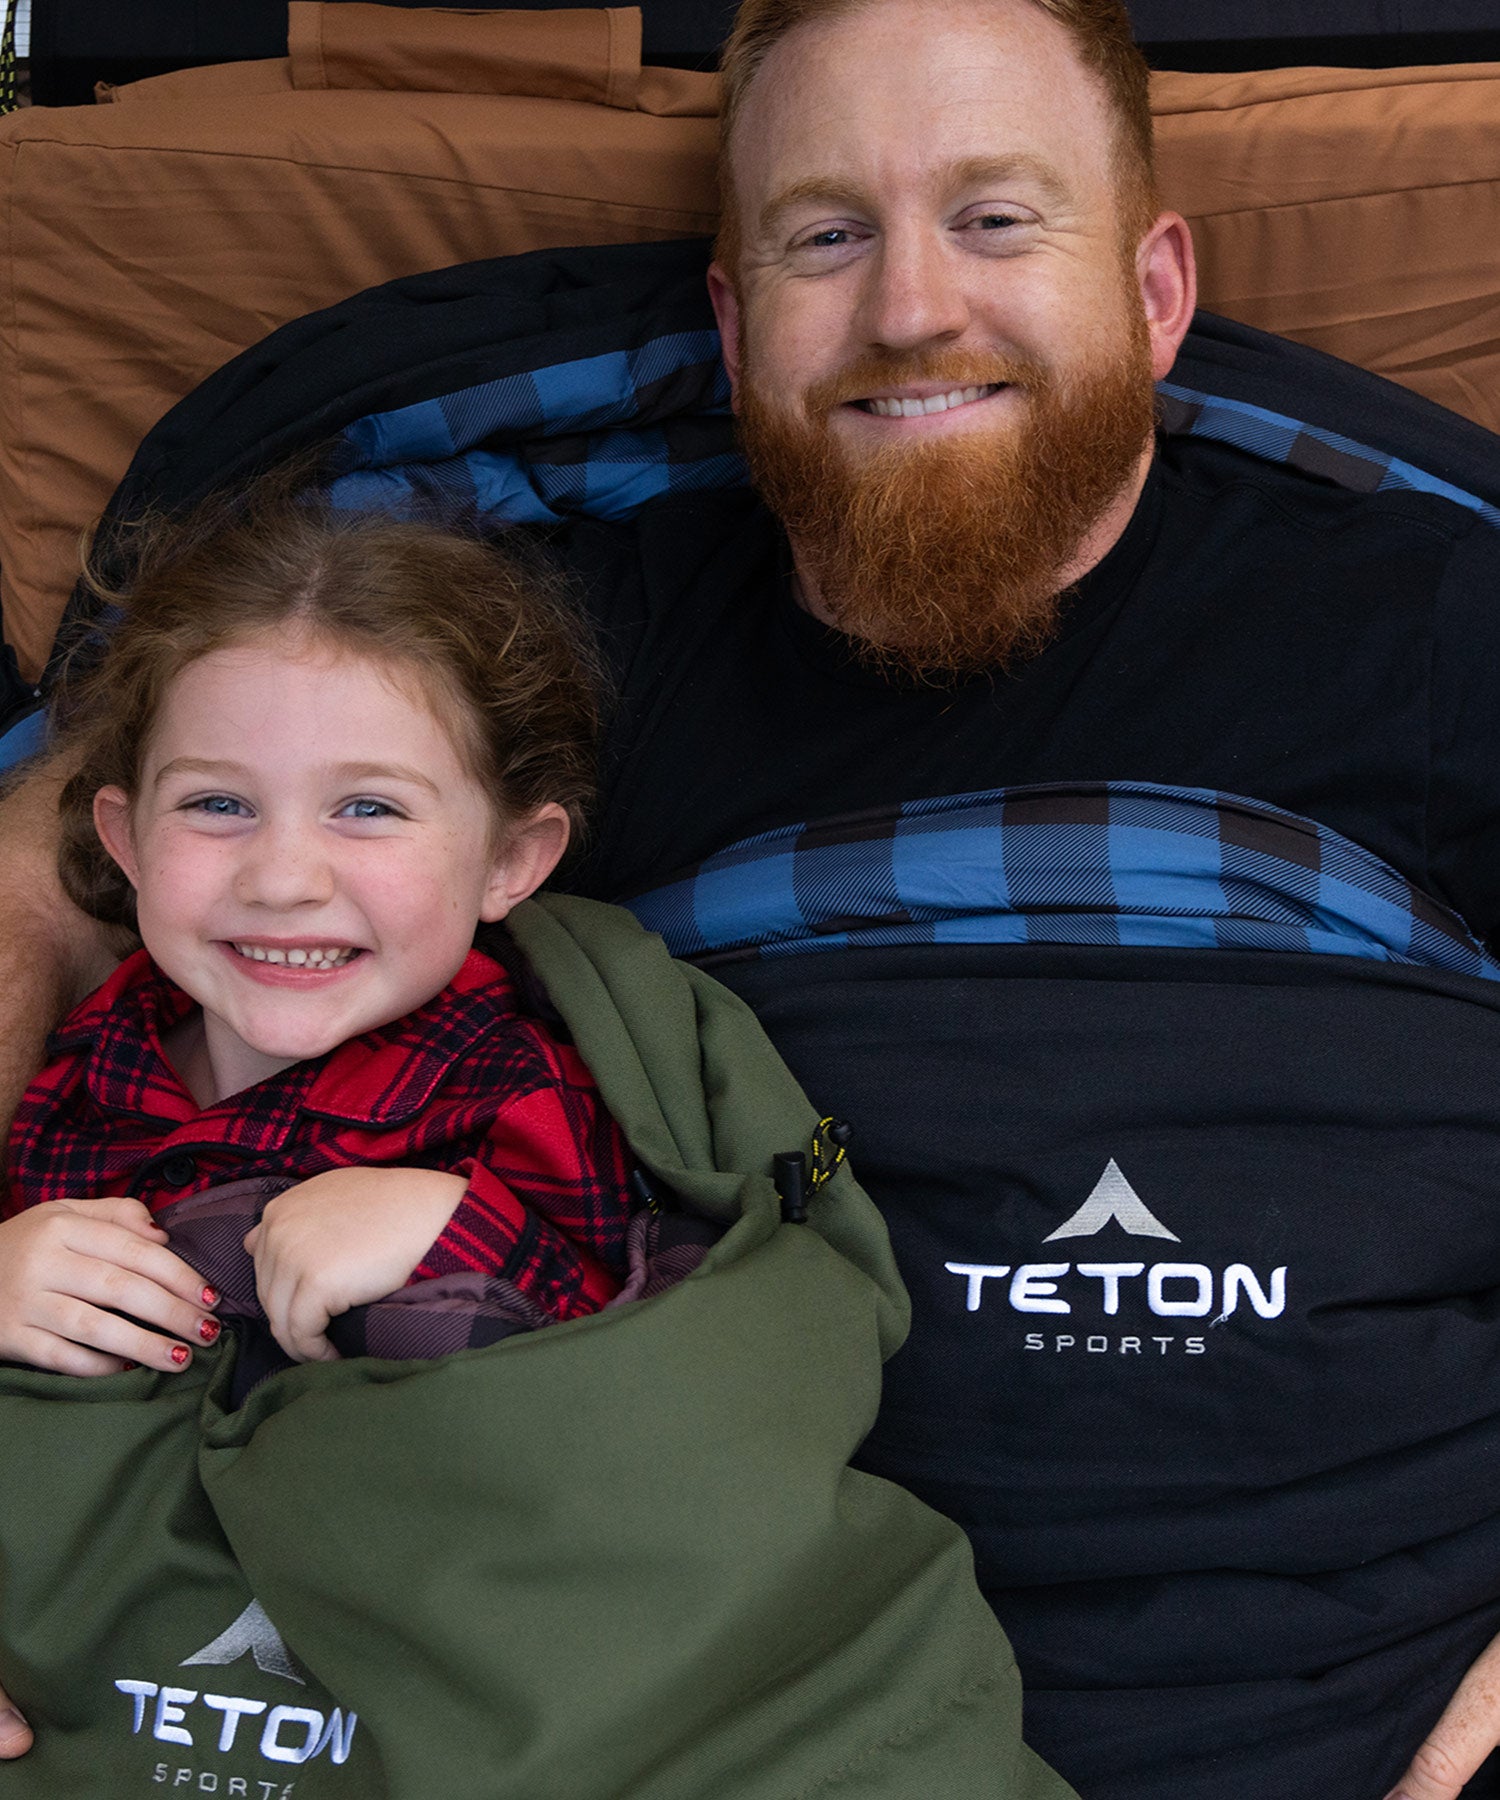 Image shows a man and child smiling while snuggled in two TETON Sports Bridger Canvas Sleeping Bags.